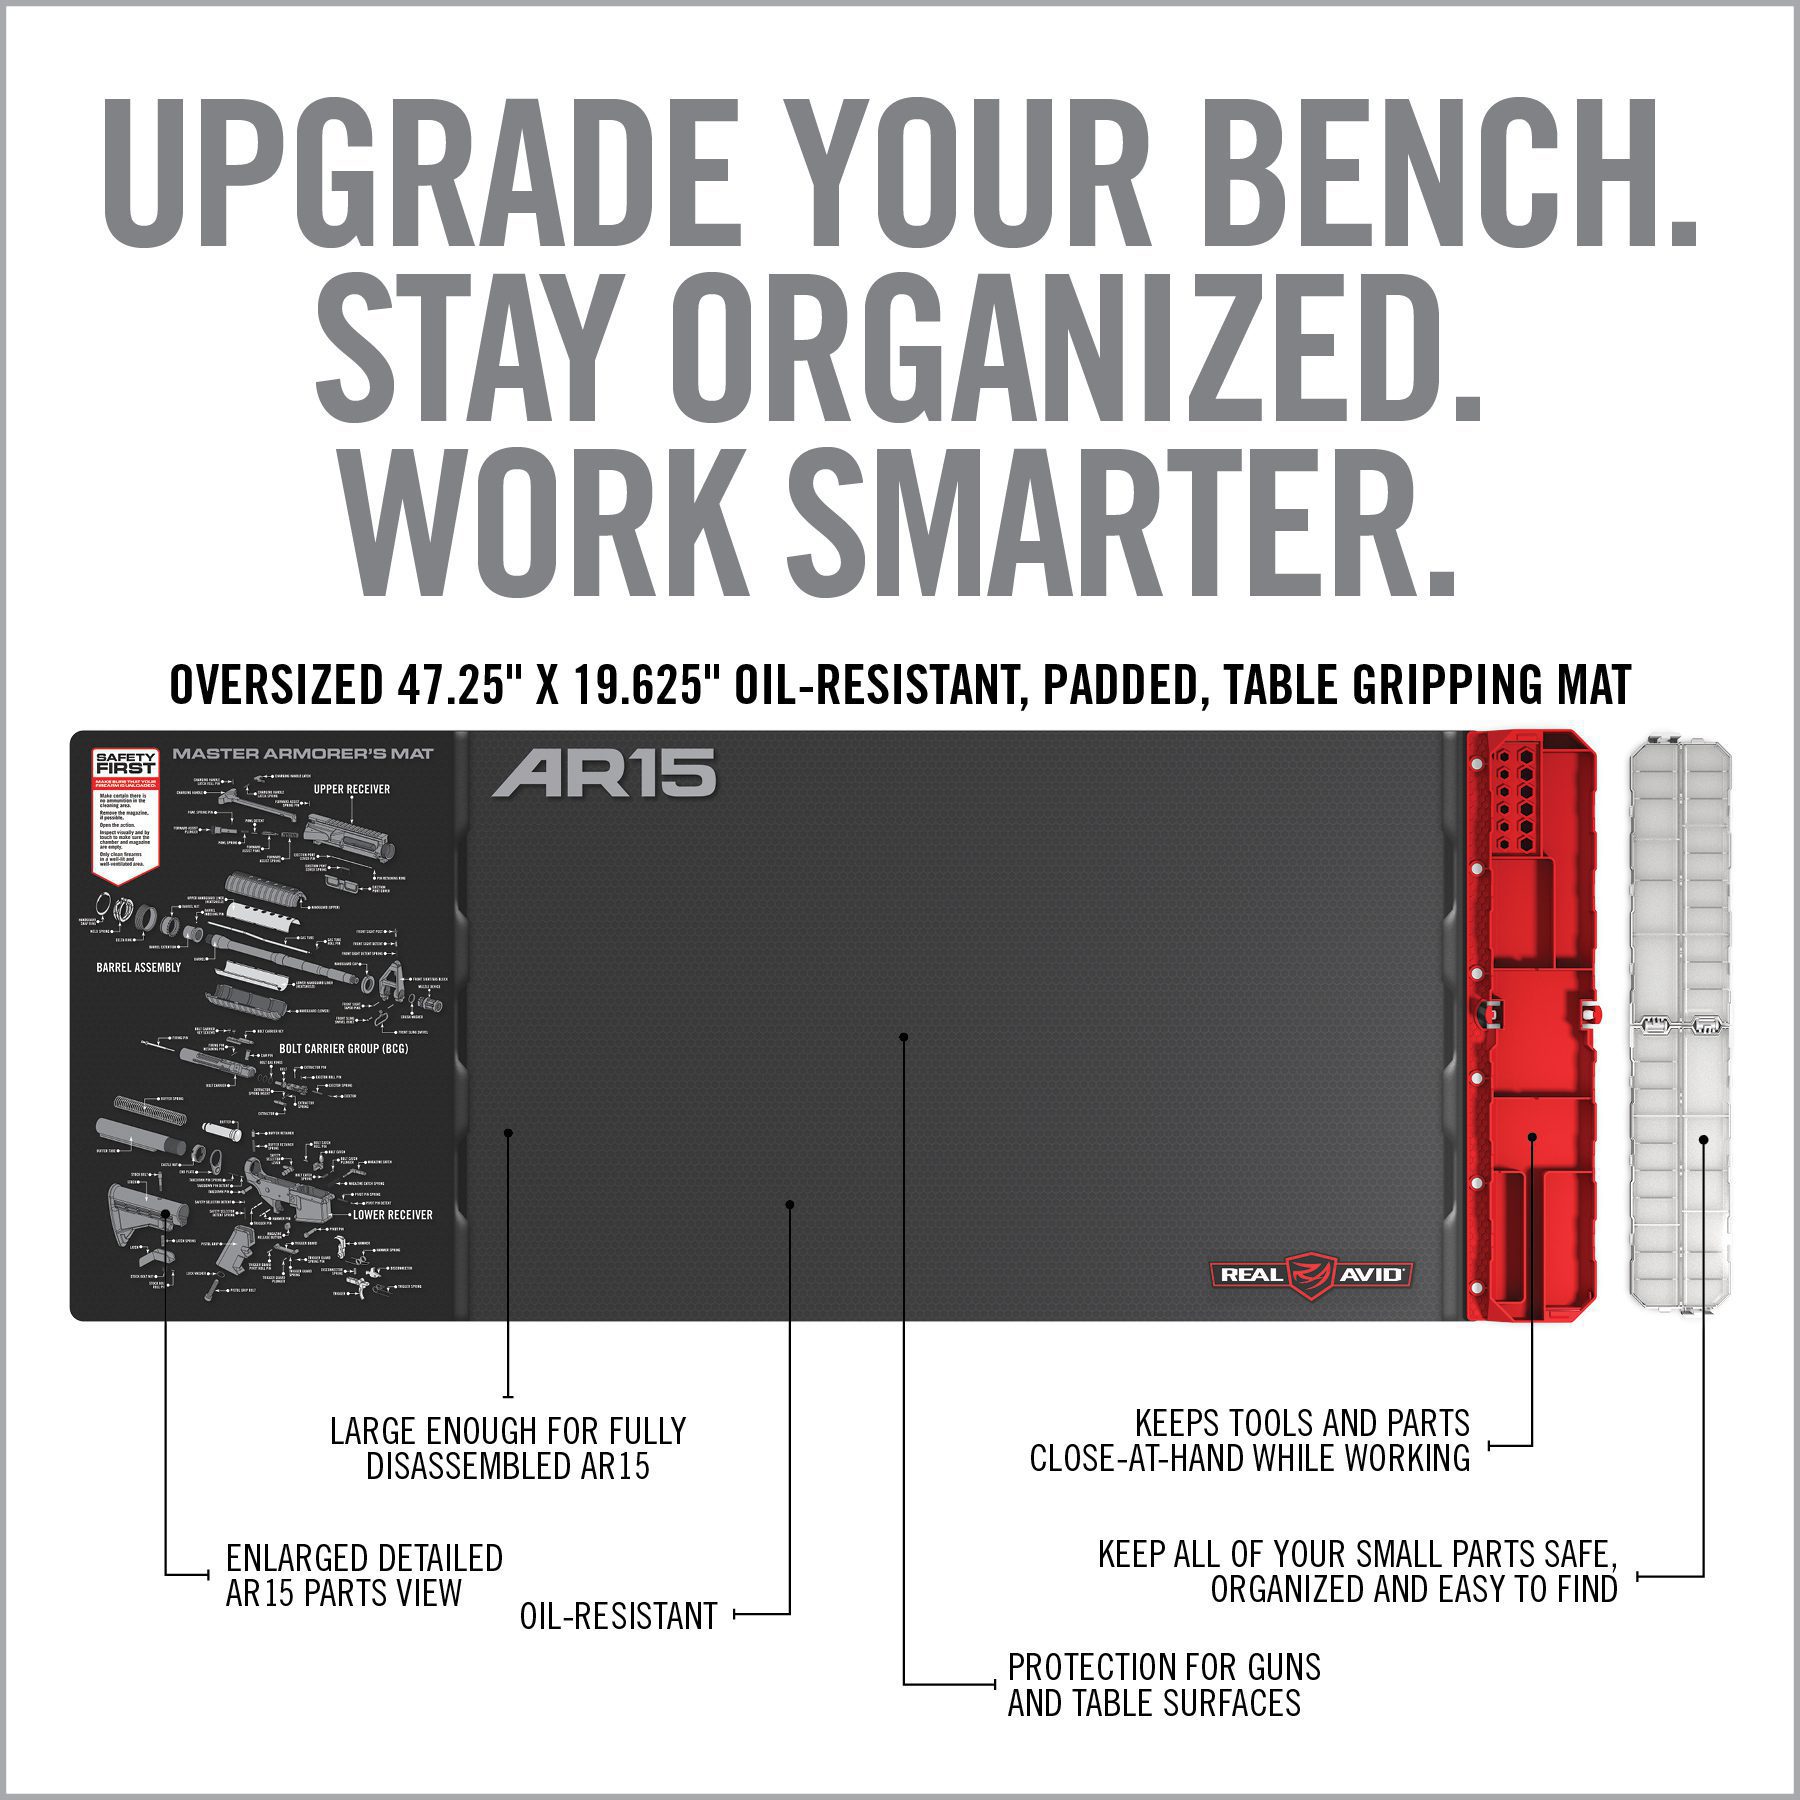 a poster with instructions on how to use the bench